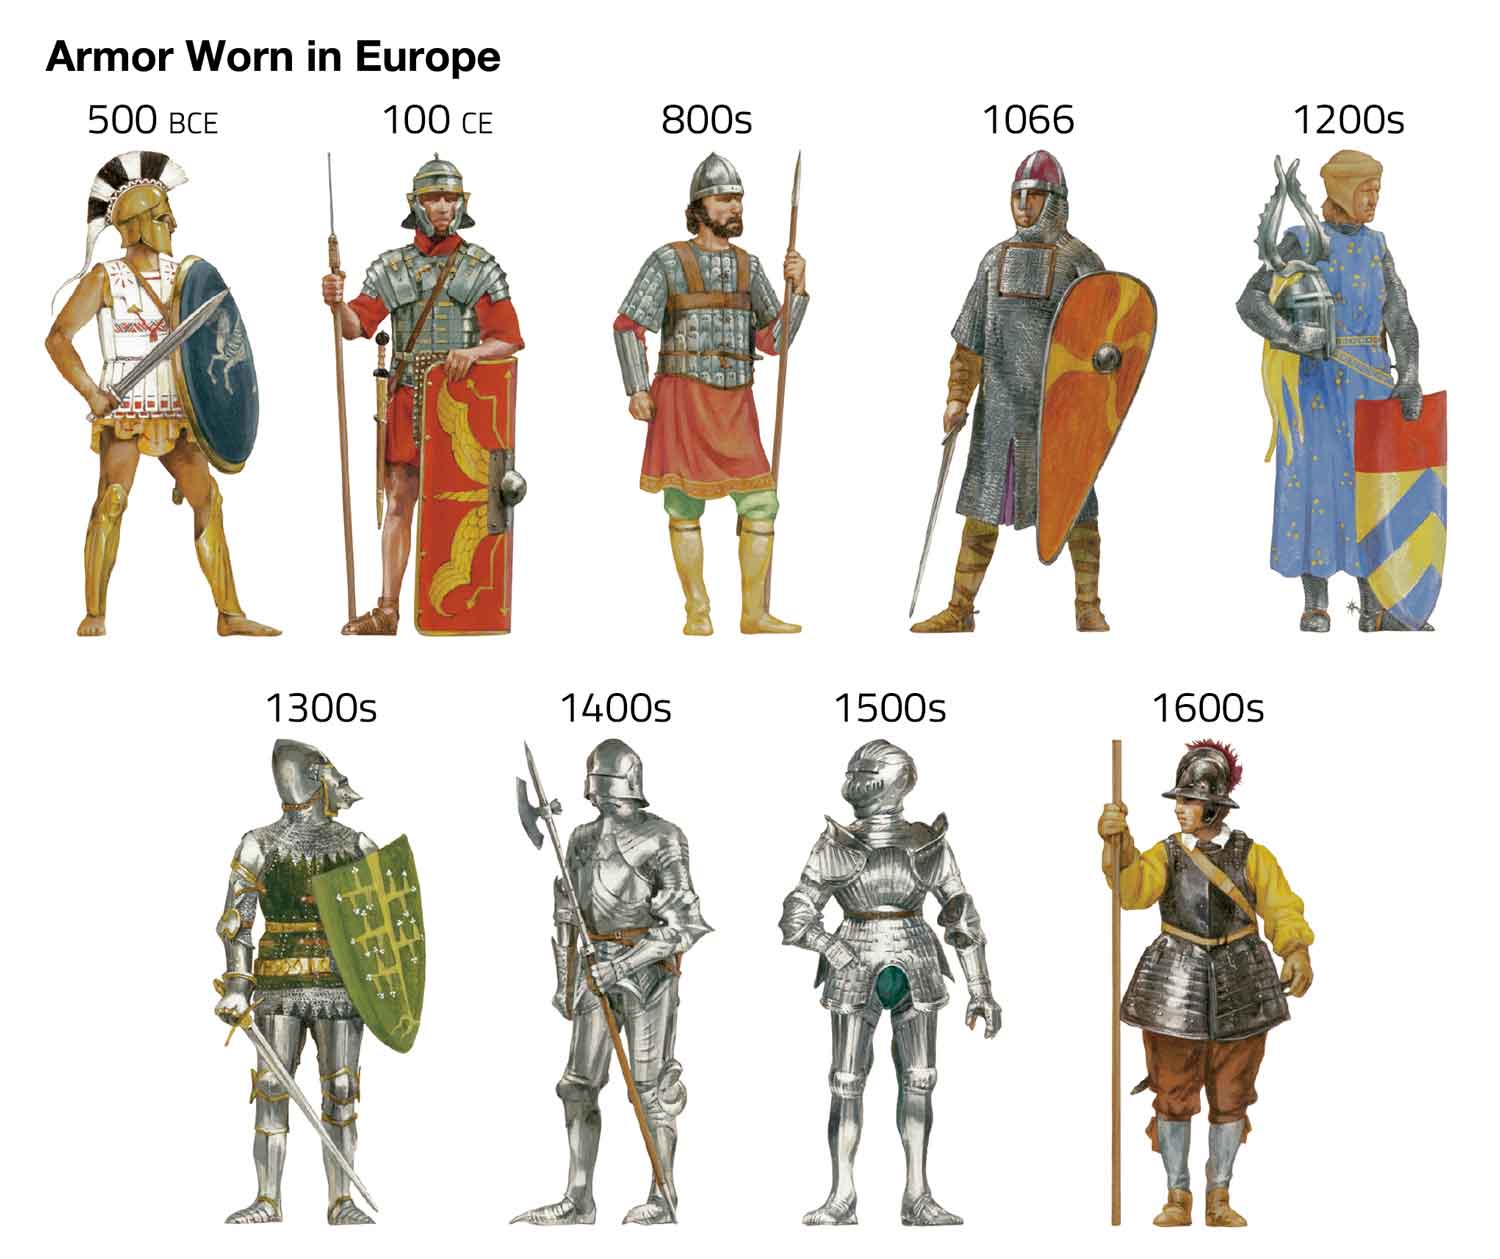 Illustration showing European armor from 500 BCE to the 1600s.